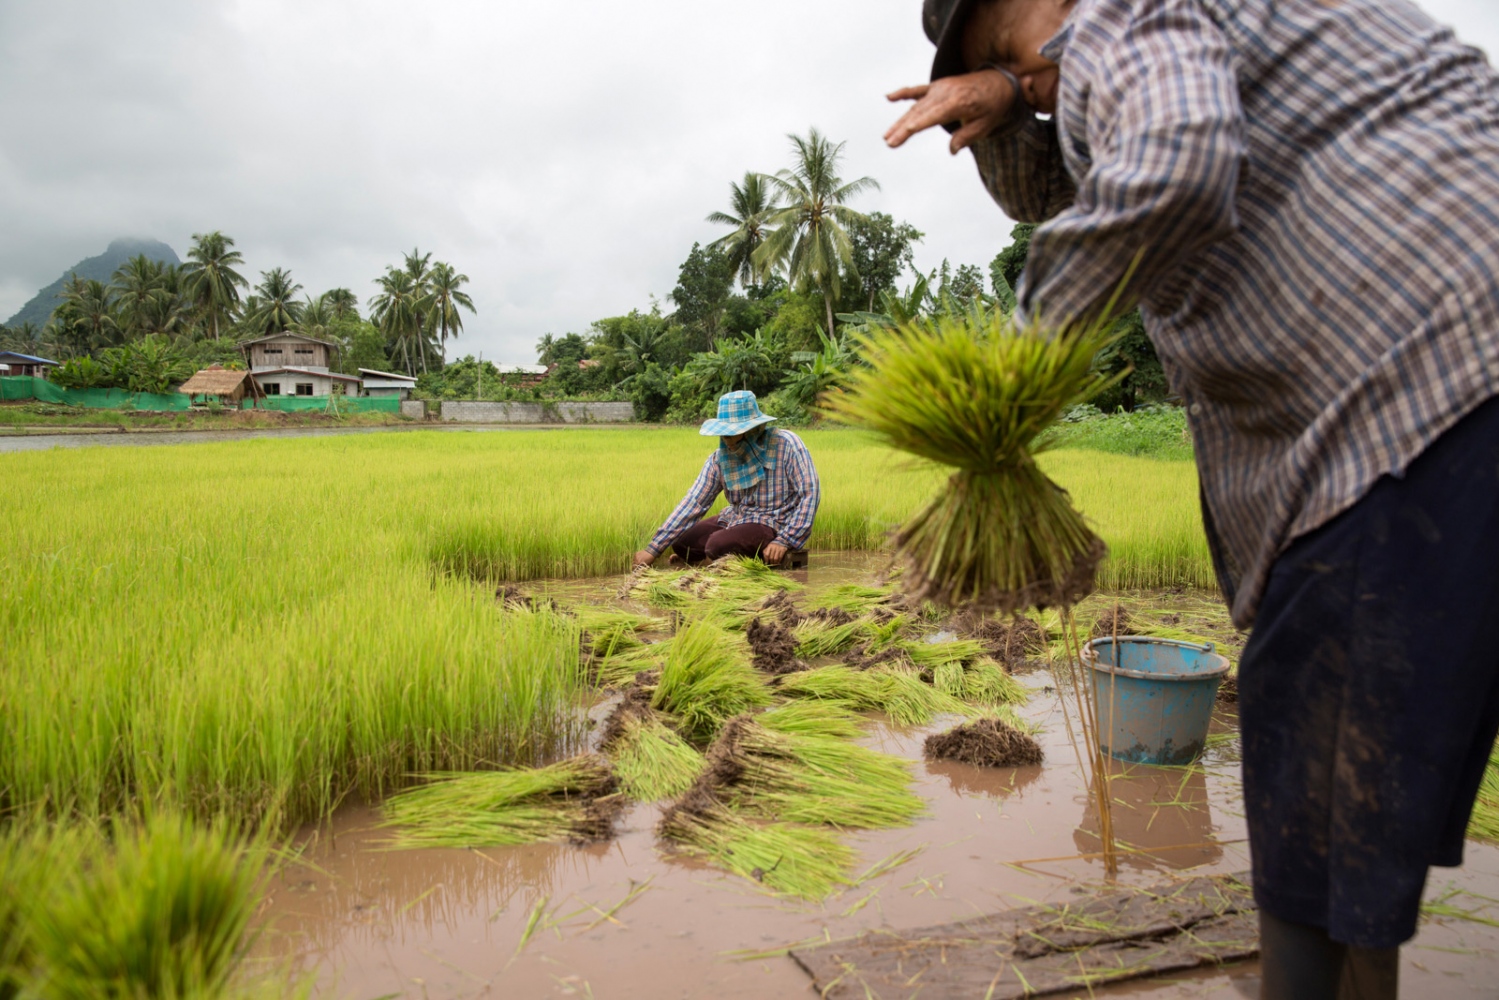 Rice farmers in the village of ...ts such as arsenic and cyanide.